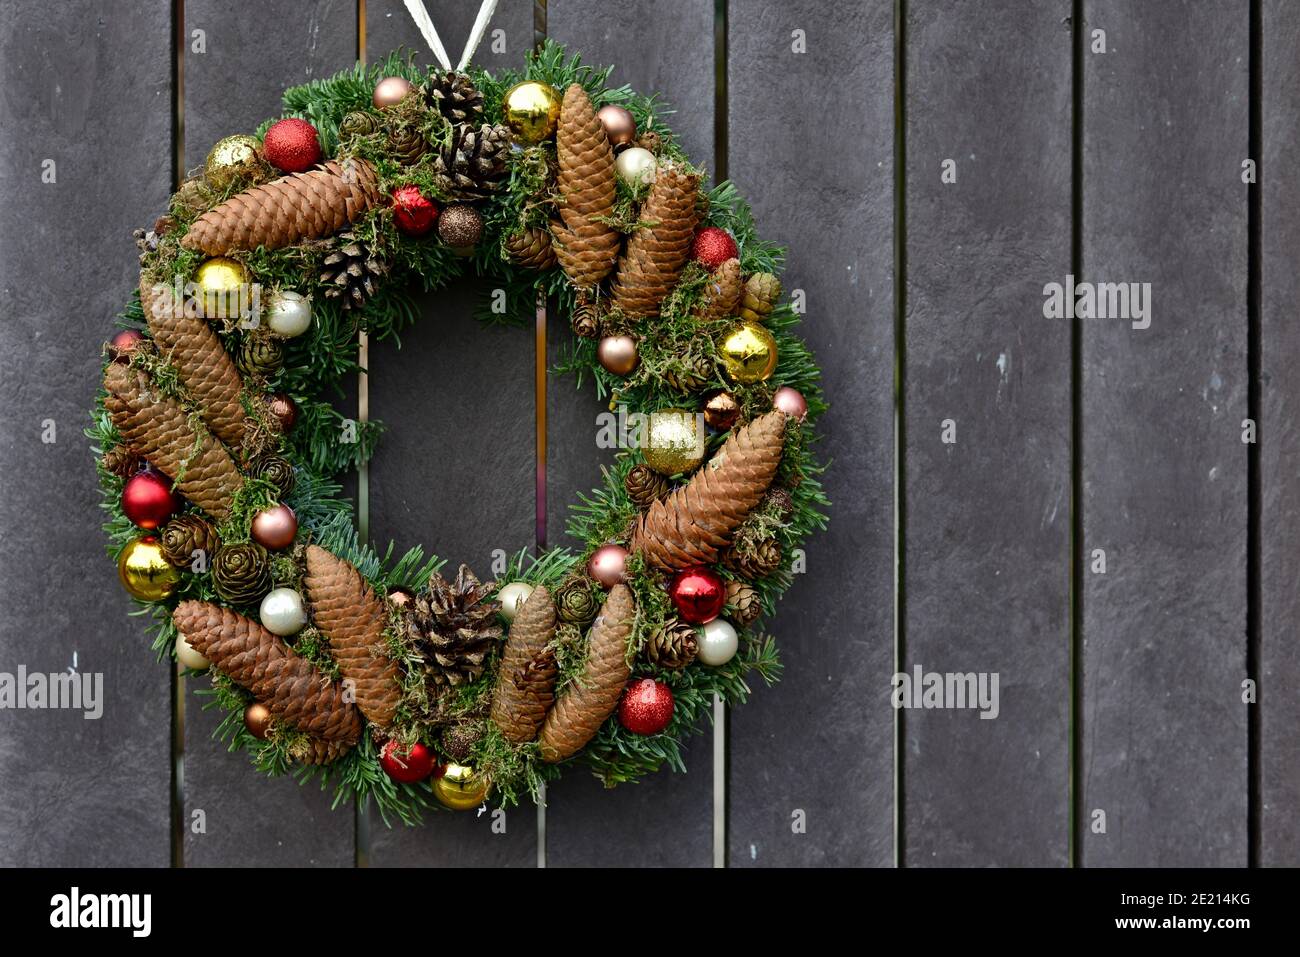 Christmas wreath with gold and silver ornaments and cones of coniferous trees. Circle of needles and cones decorated with Christmas decorations. Decor Stock Photo